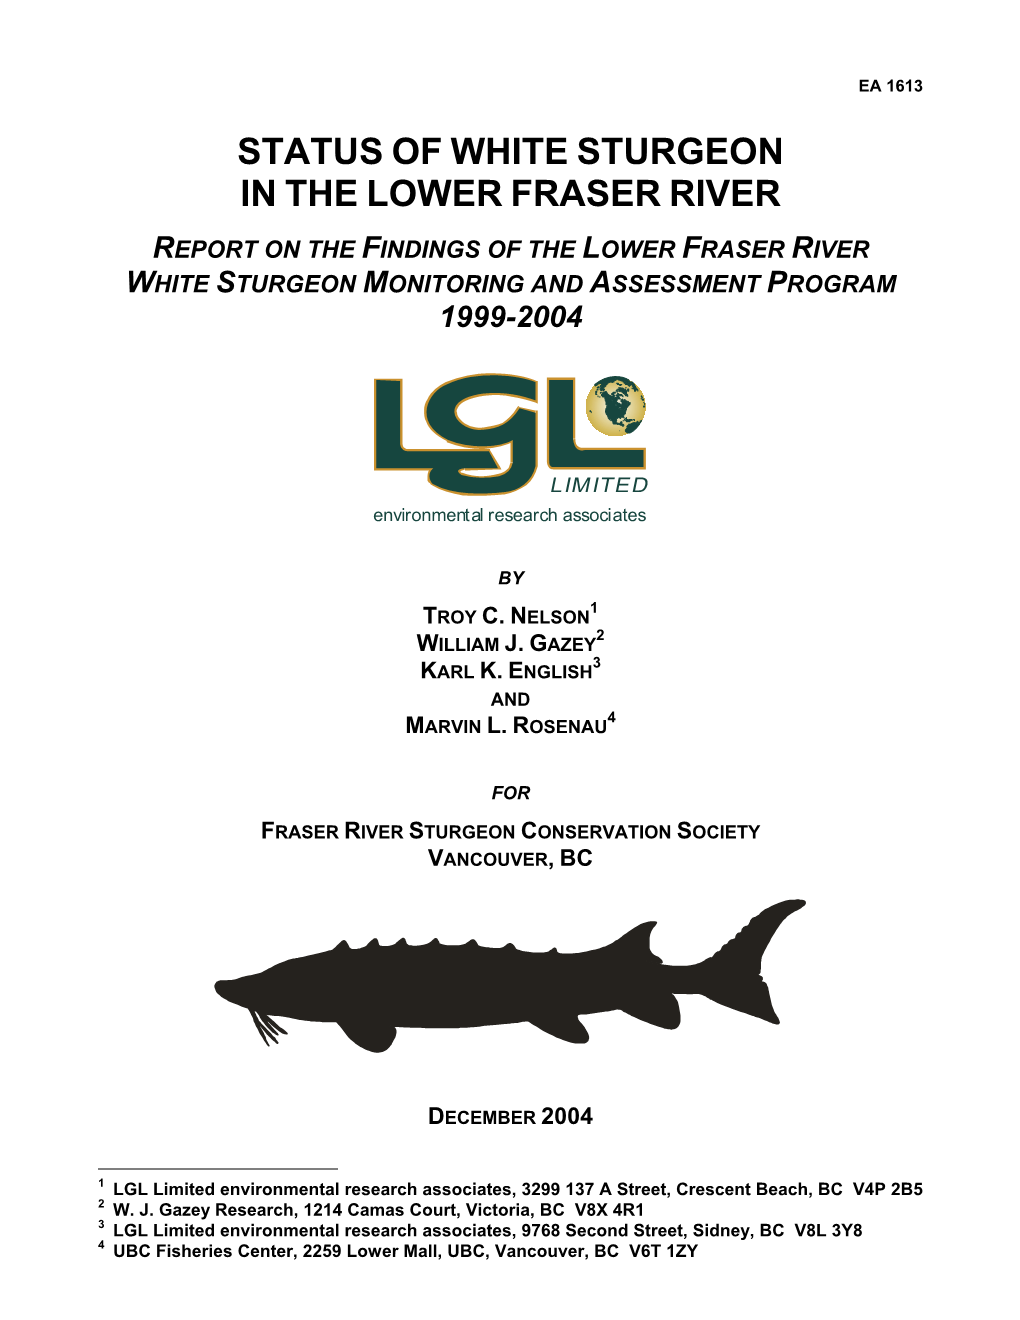 Status of White Sturgeon in the Lower Fraser River